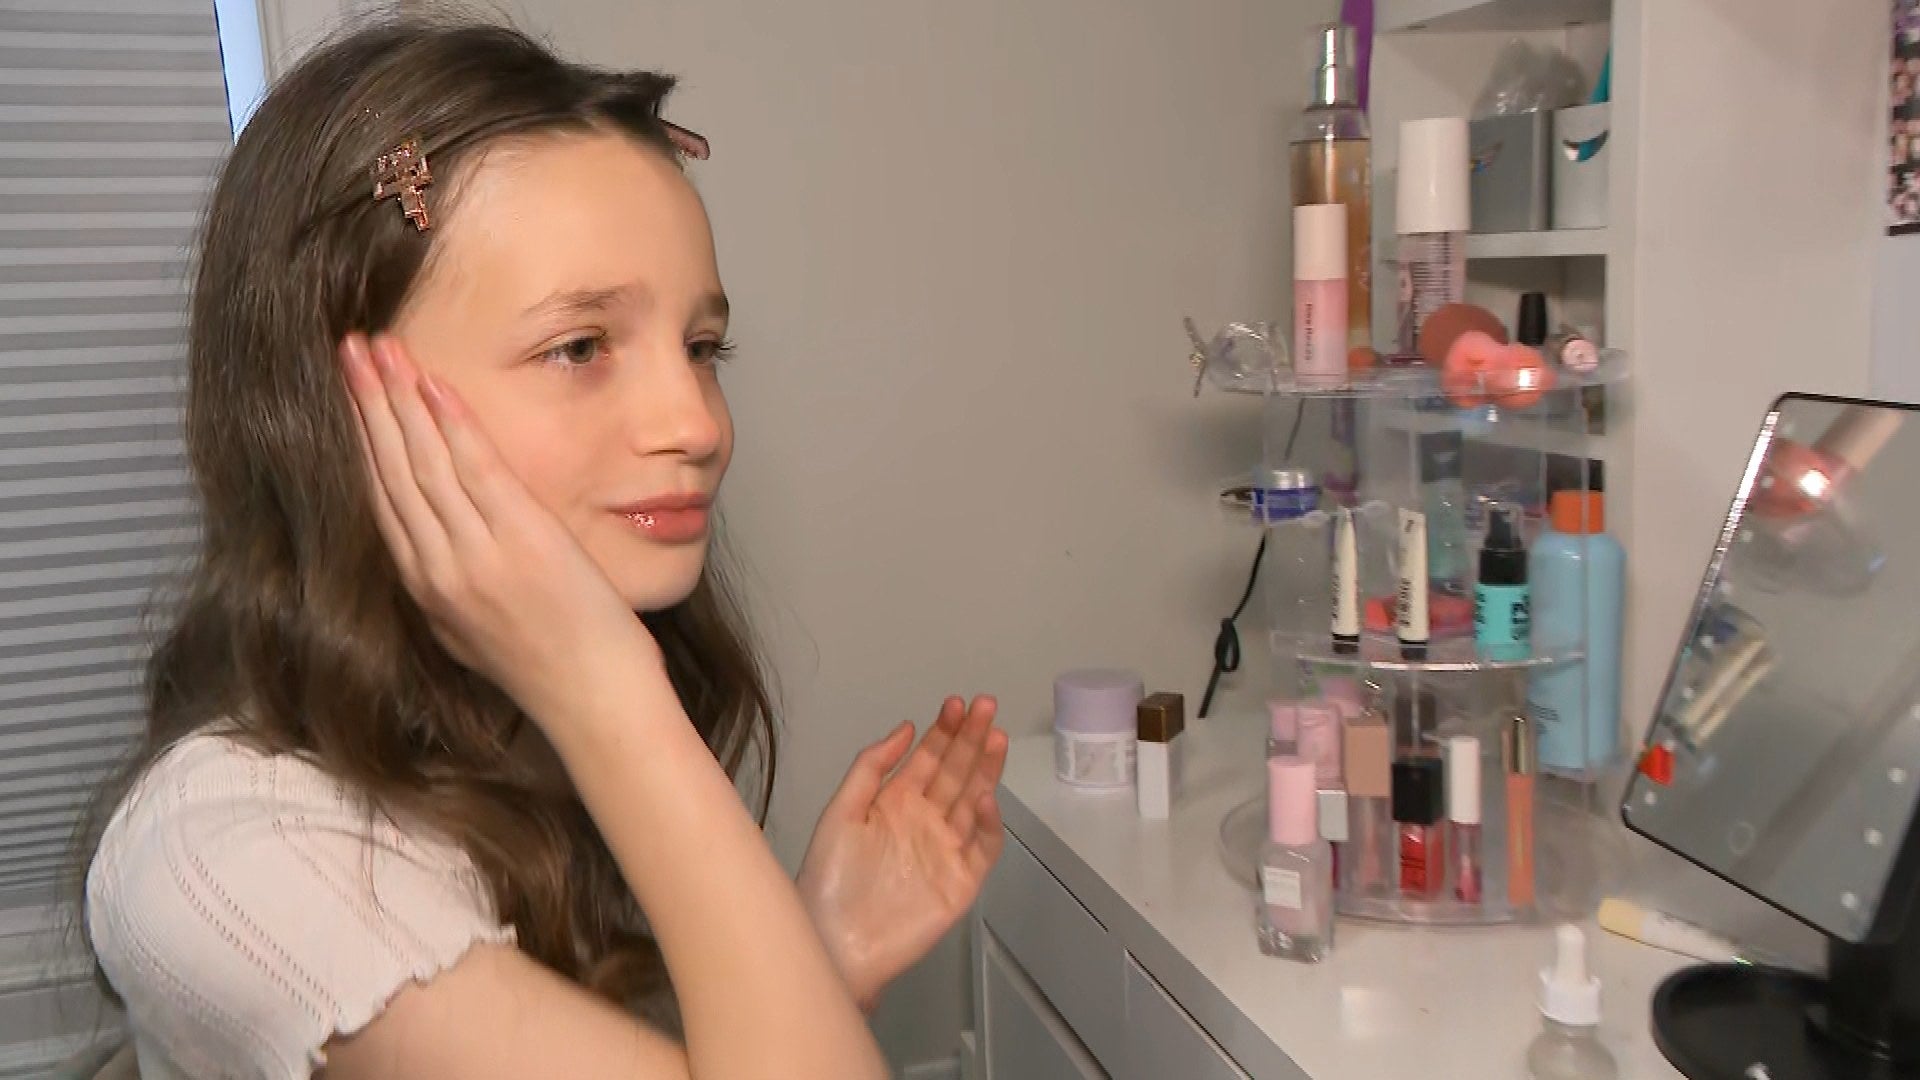 Shoppers Say Their Skin Looks “Airbrushed” Thanks to This Foundation